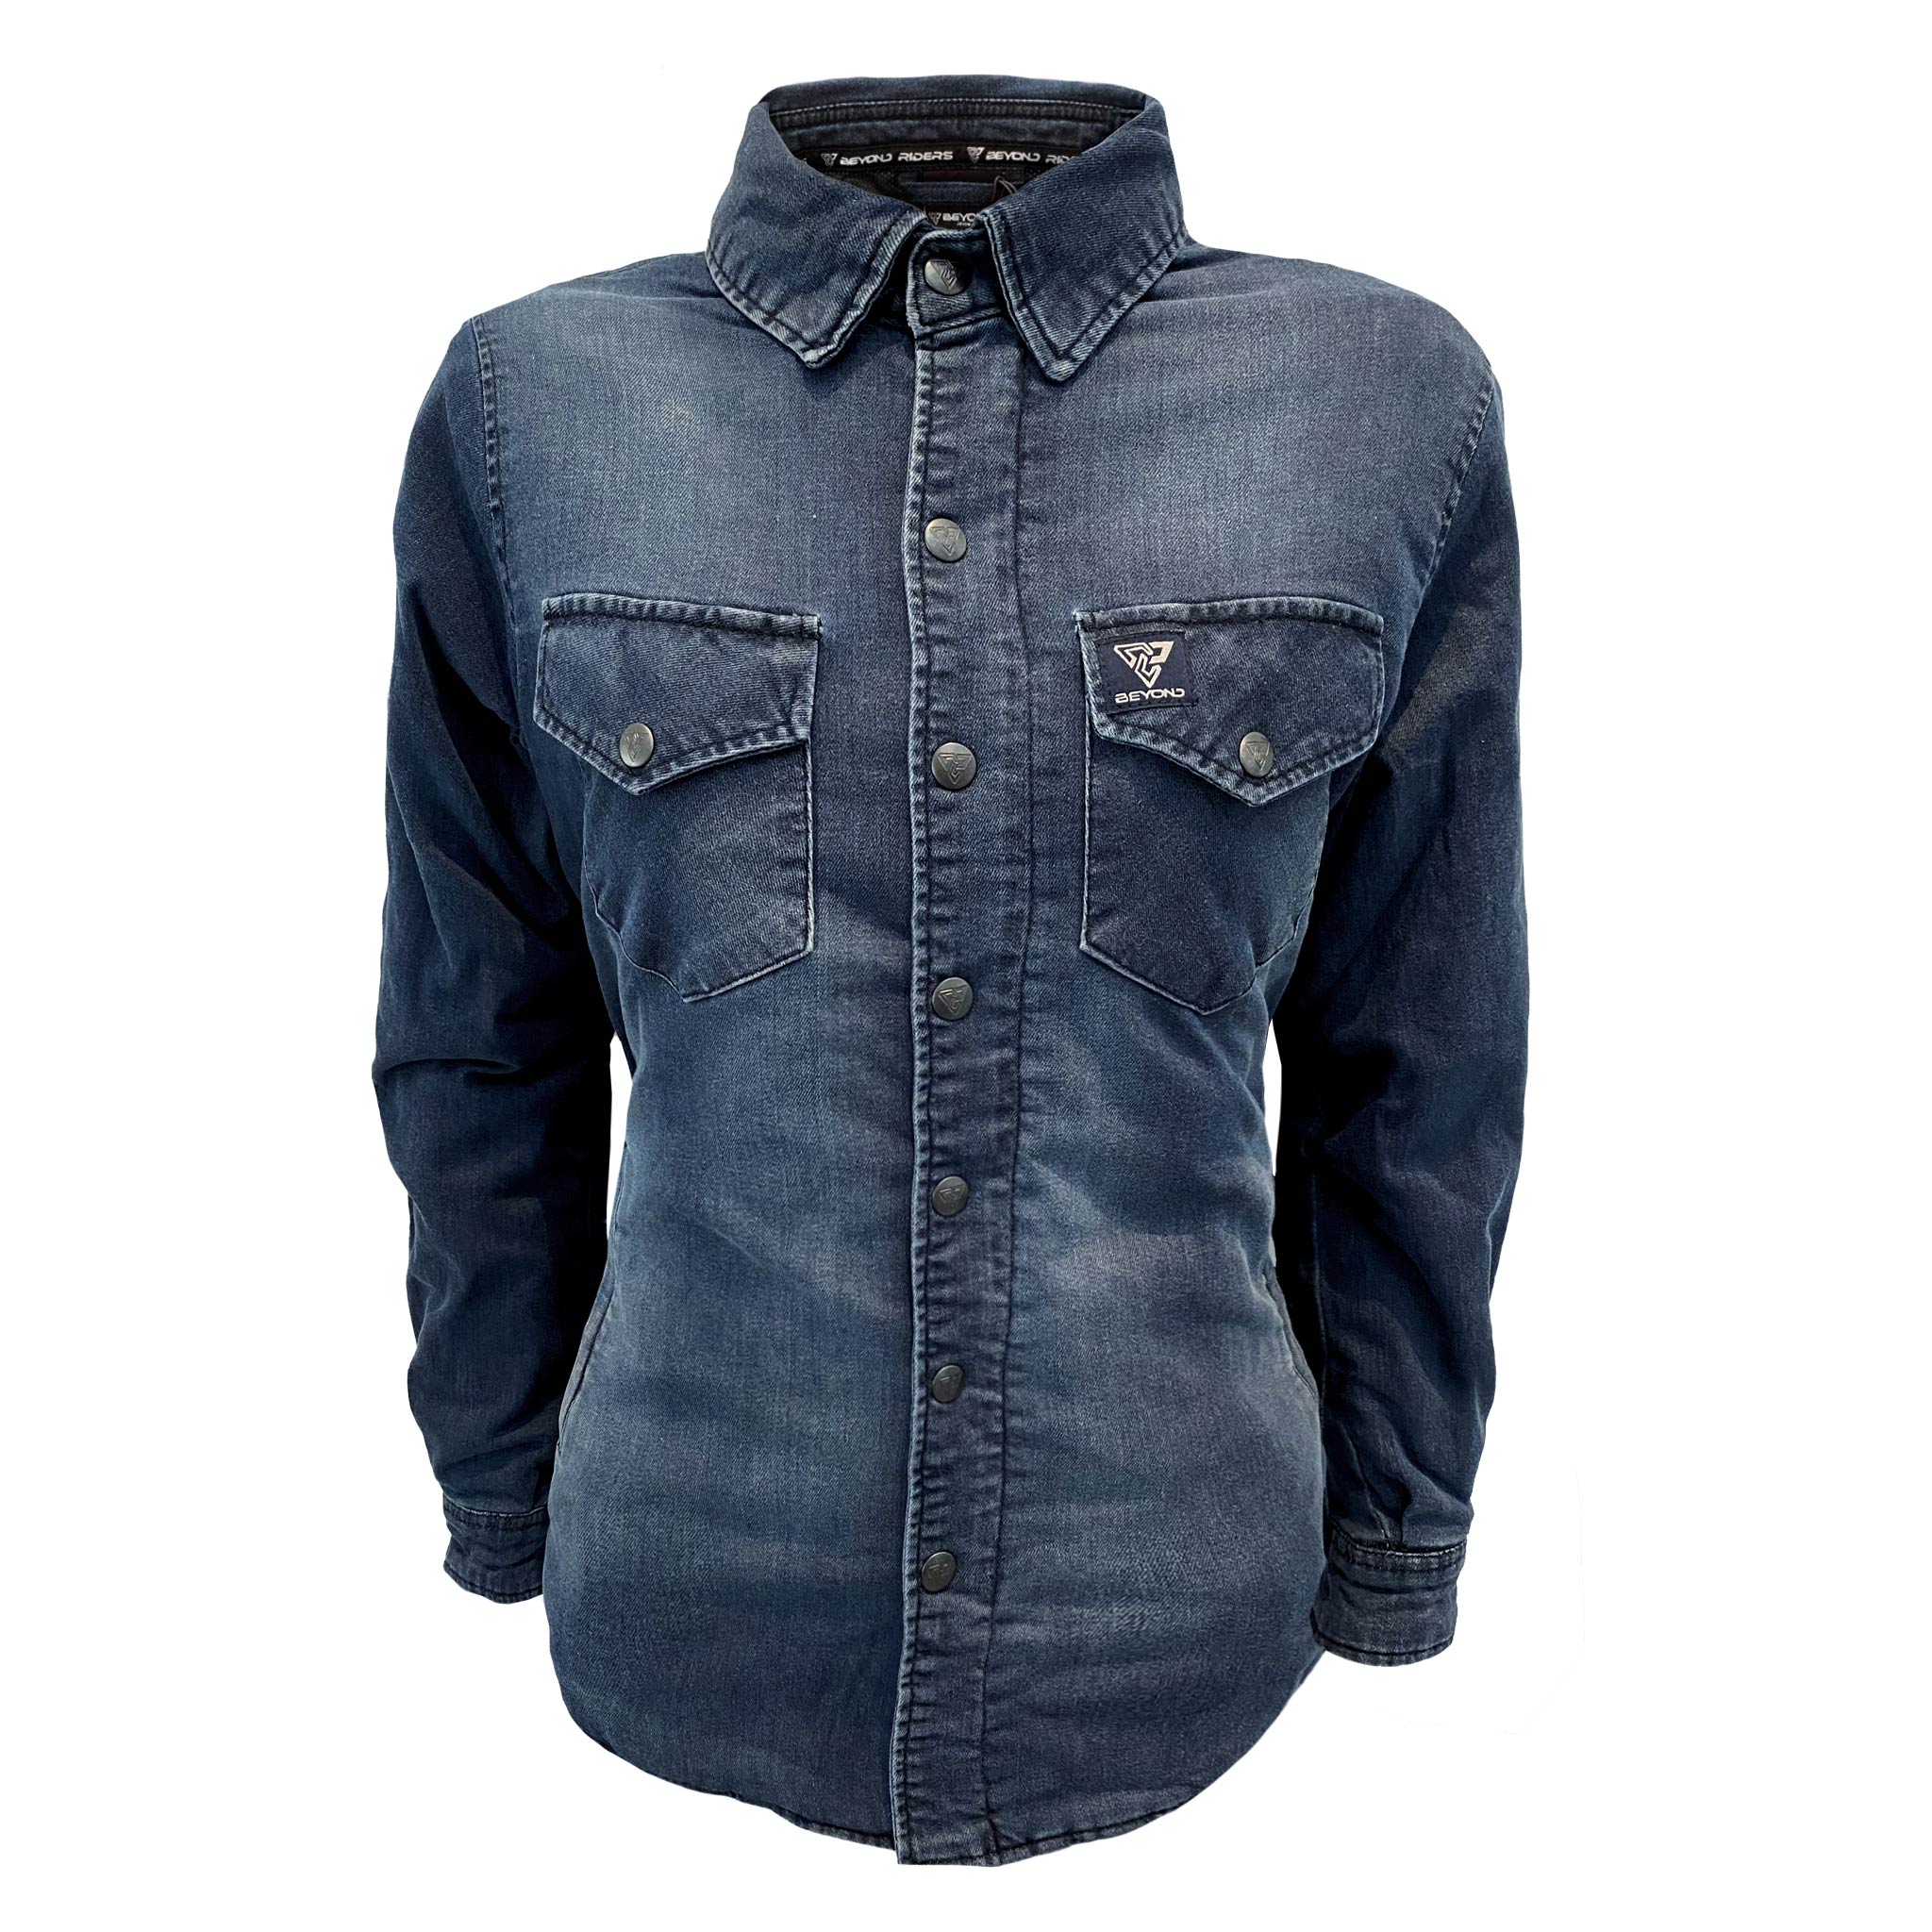 Protective Jeans Jacket for Women - Faded Blue with Pads